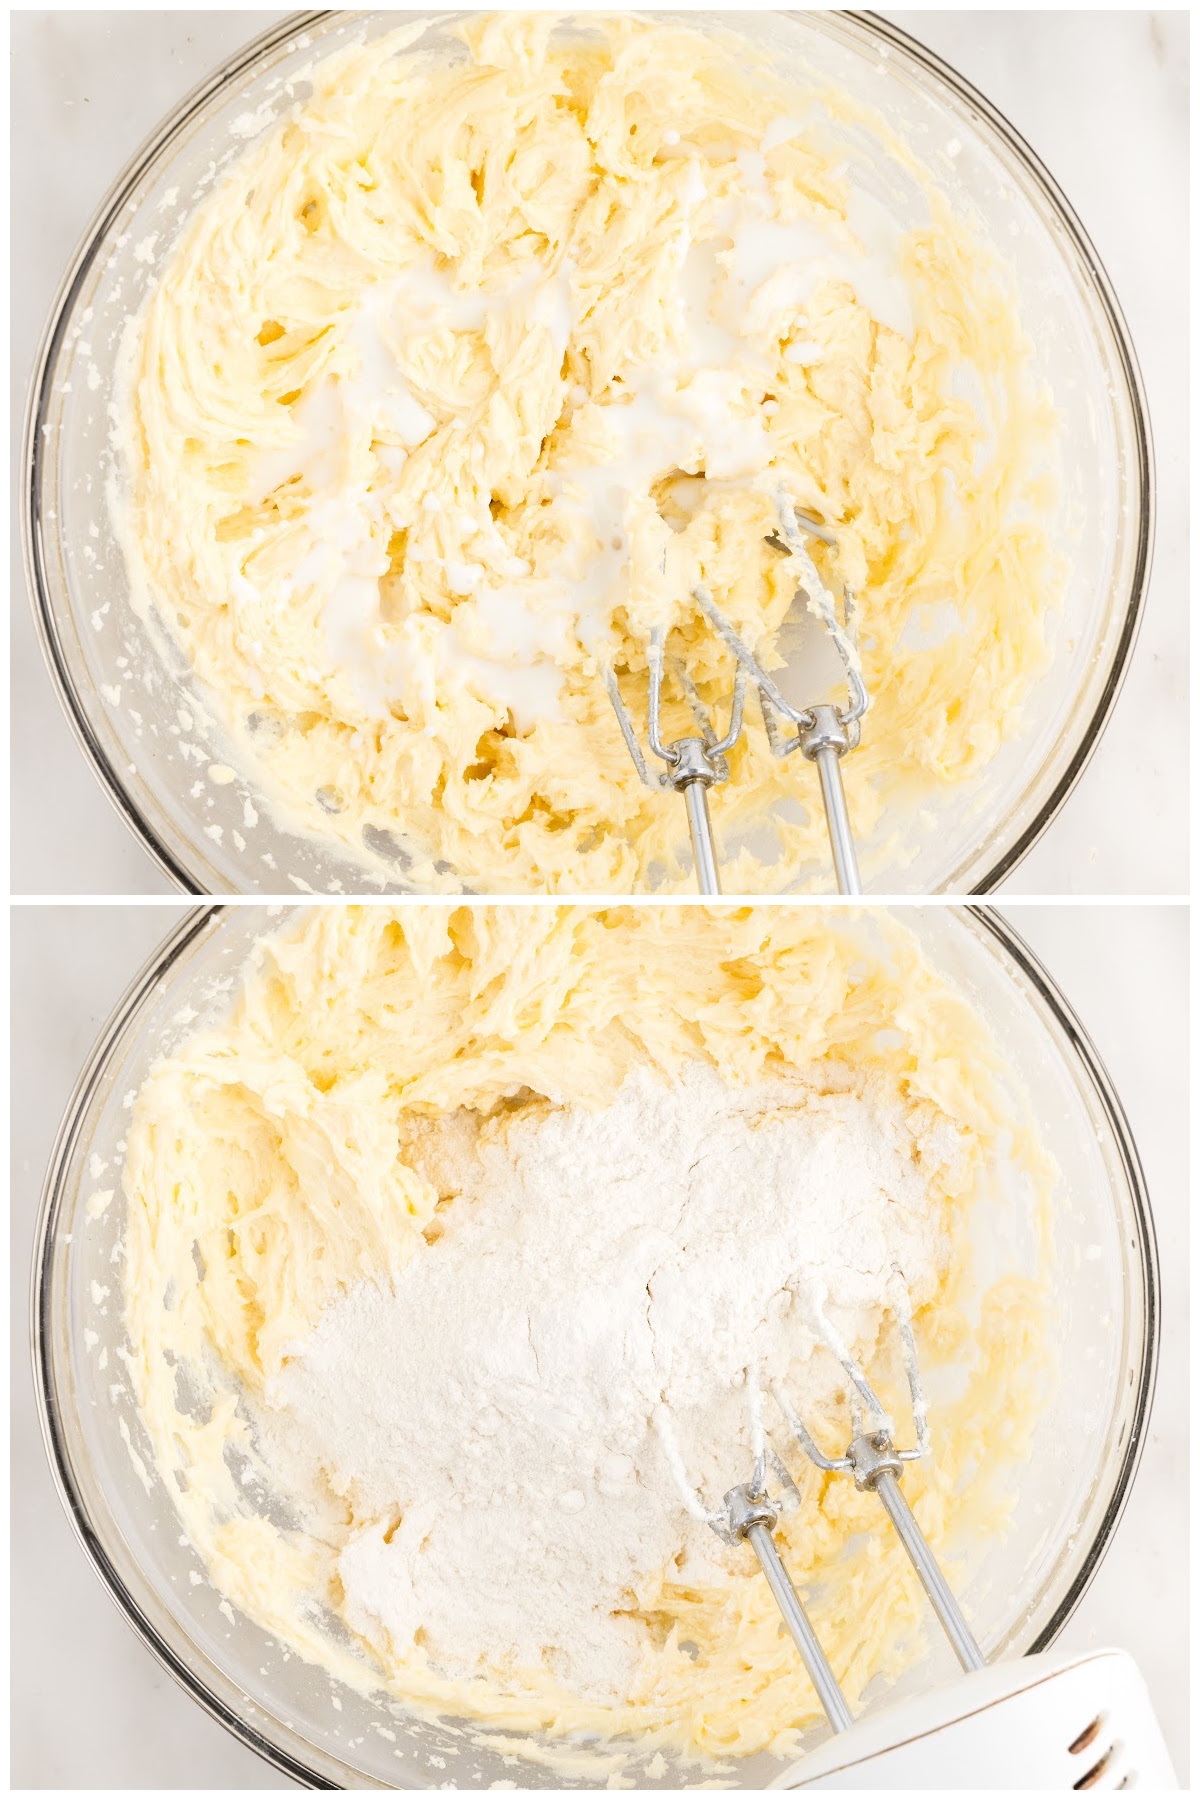 Two images of flour being added to the butter mixture with a hand mixer.